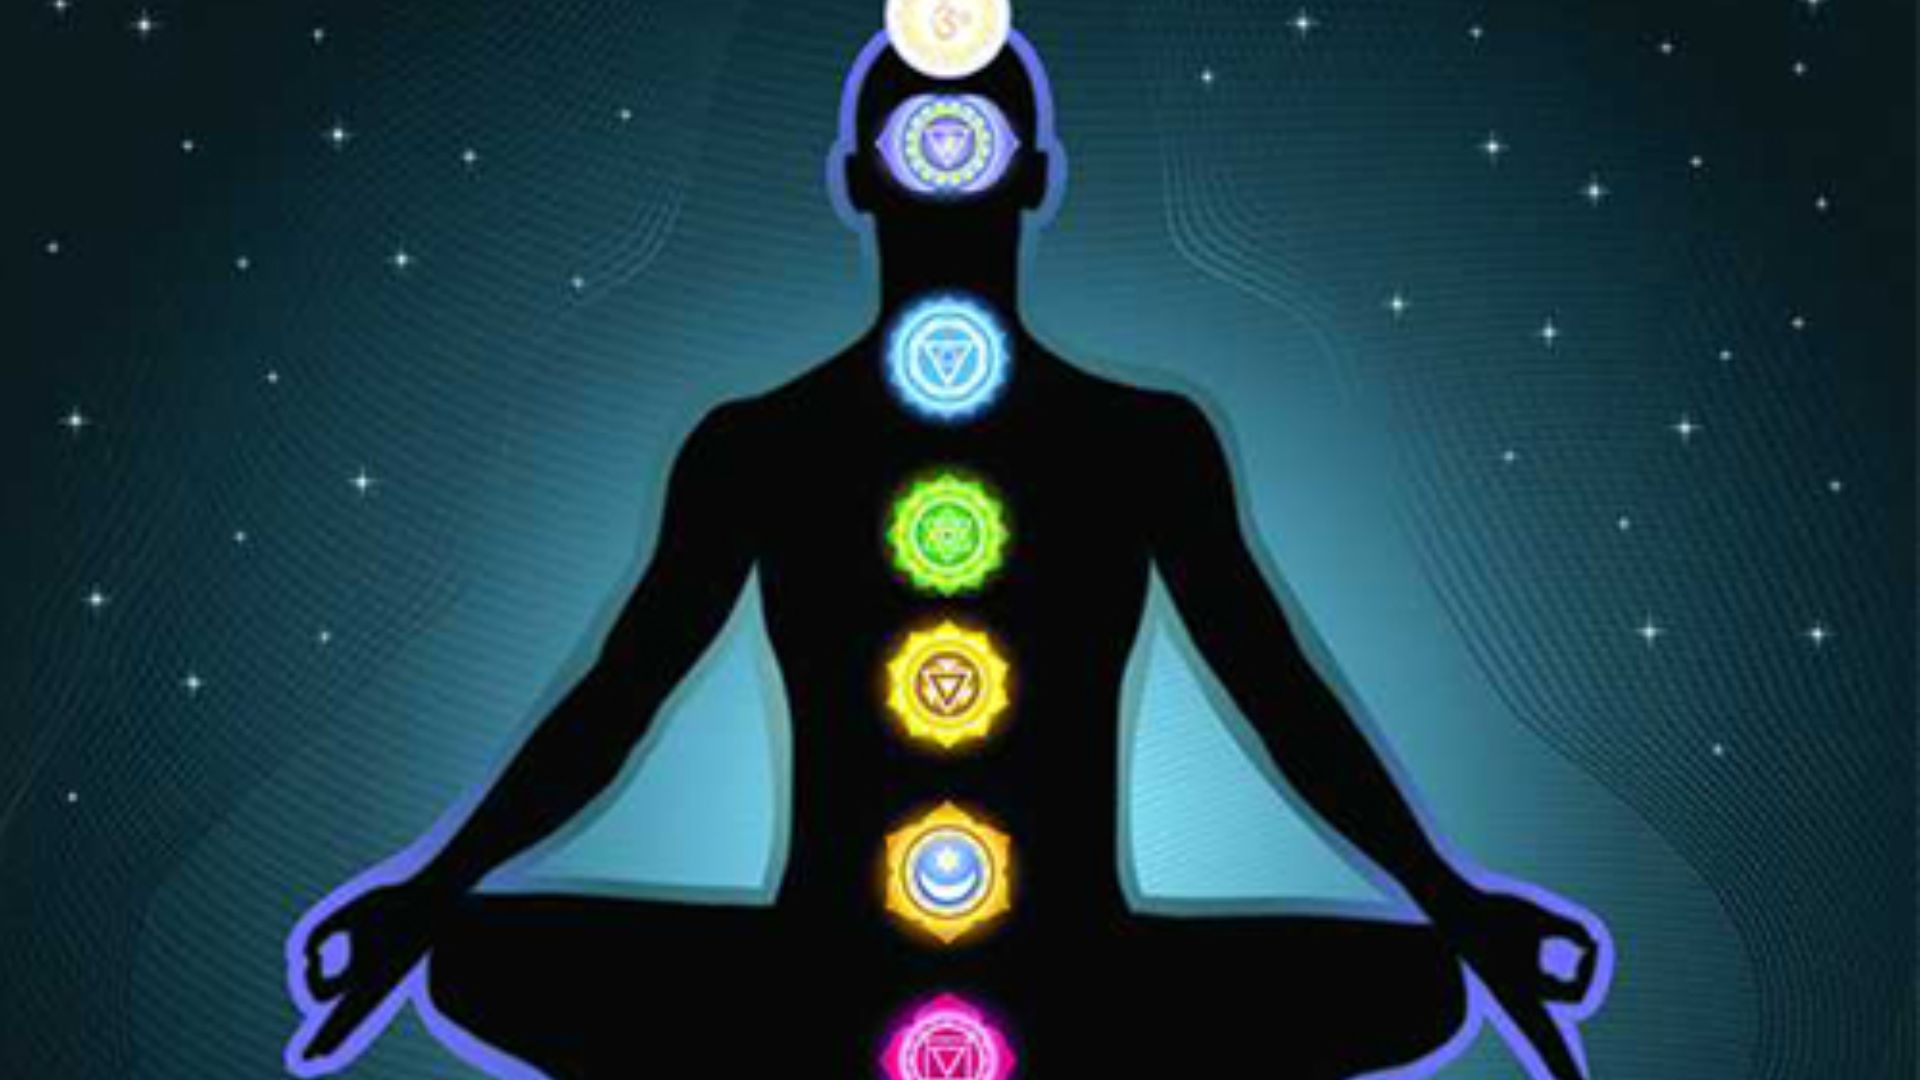 How To Unblock The 7 Chakras?